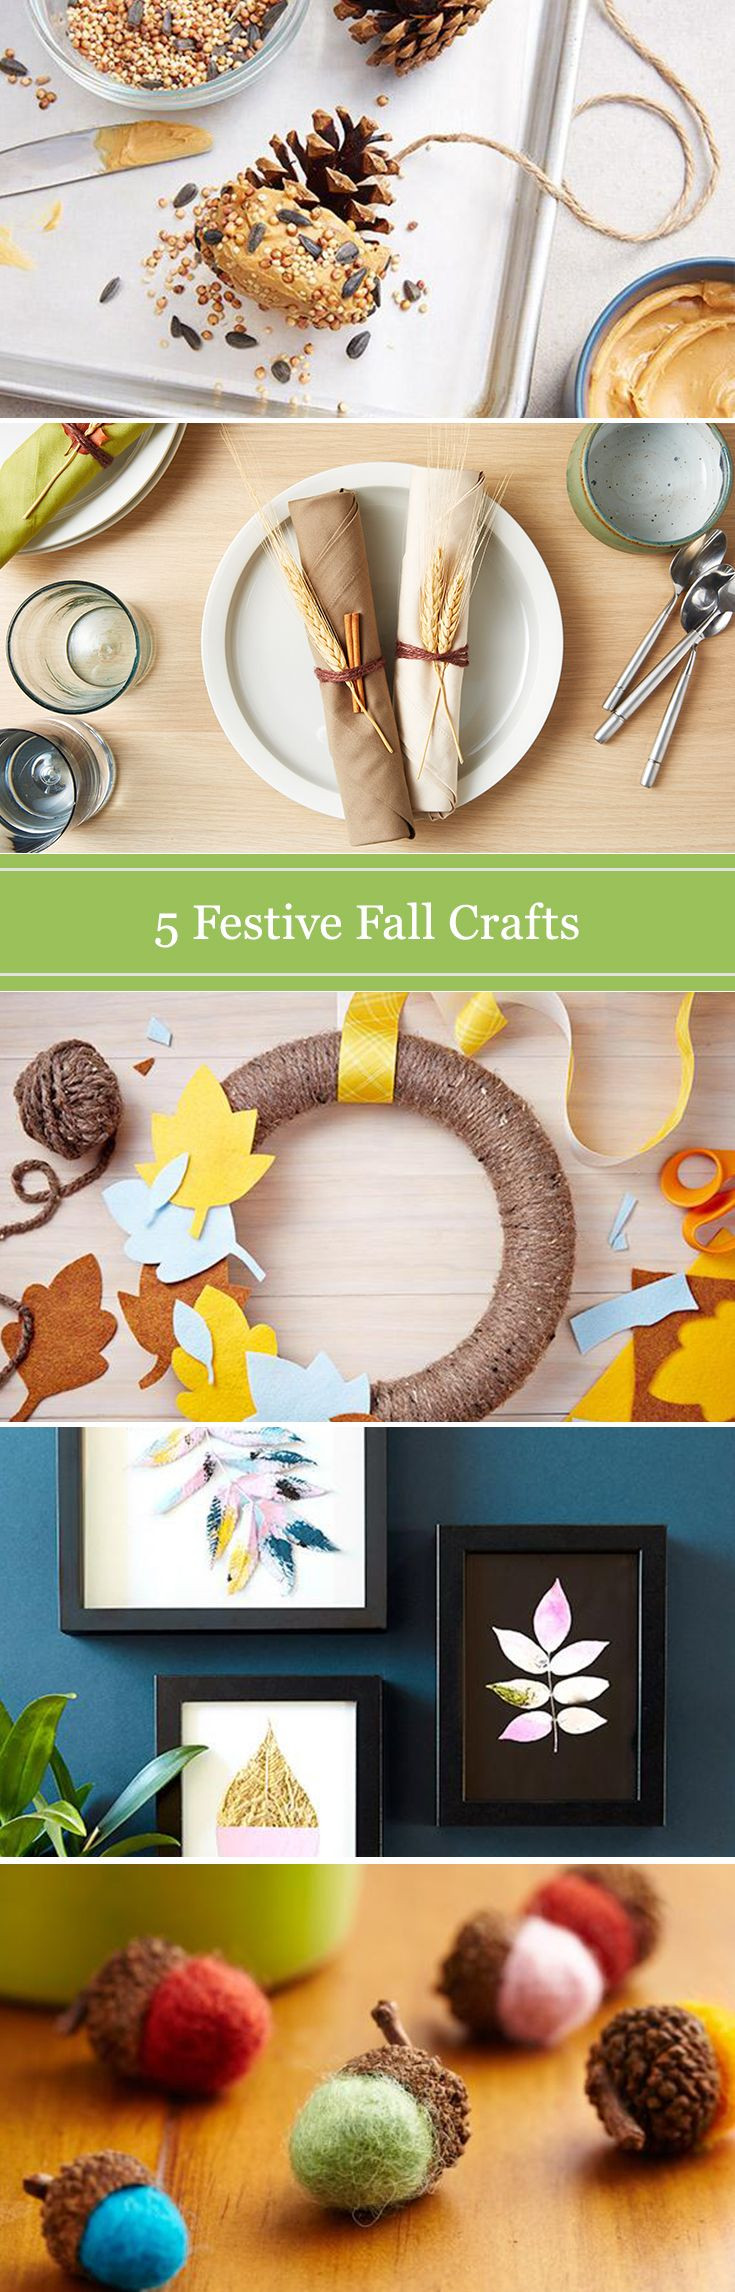 Fun Adult Crafts
 51 best Craft Ideas for Adults images on Pinterest